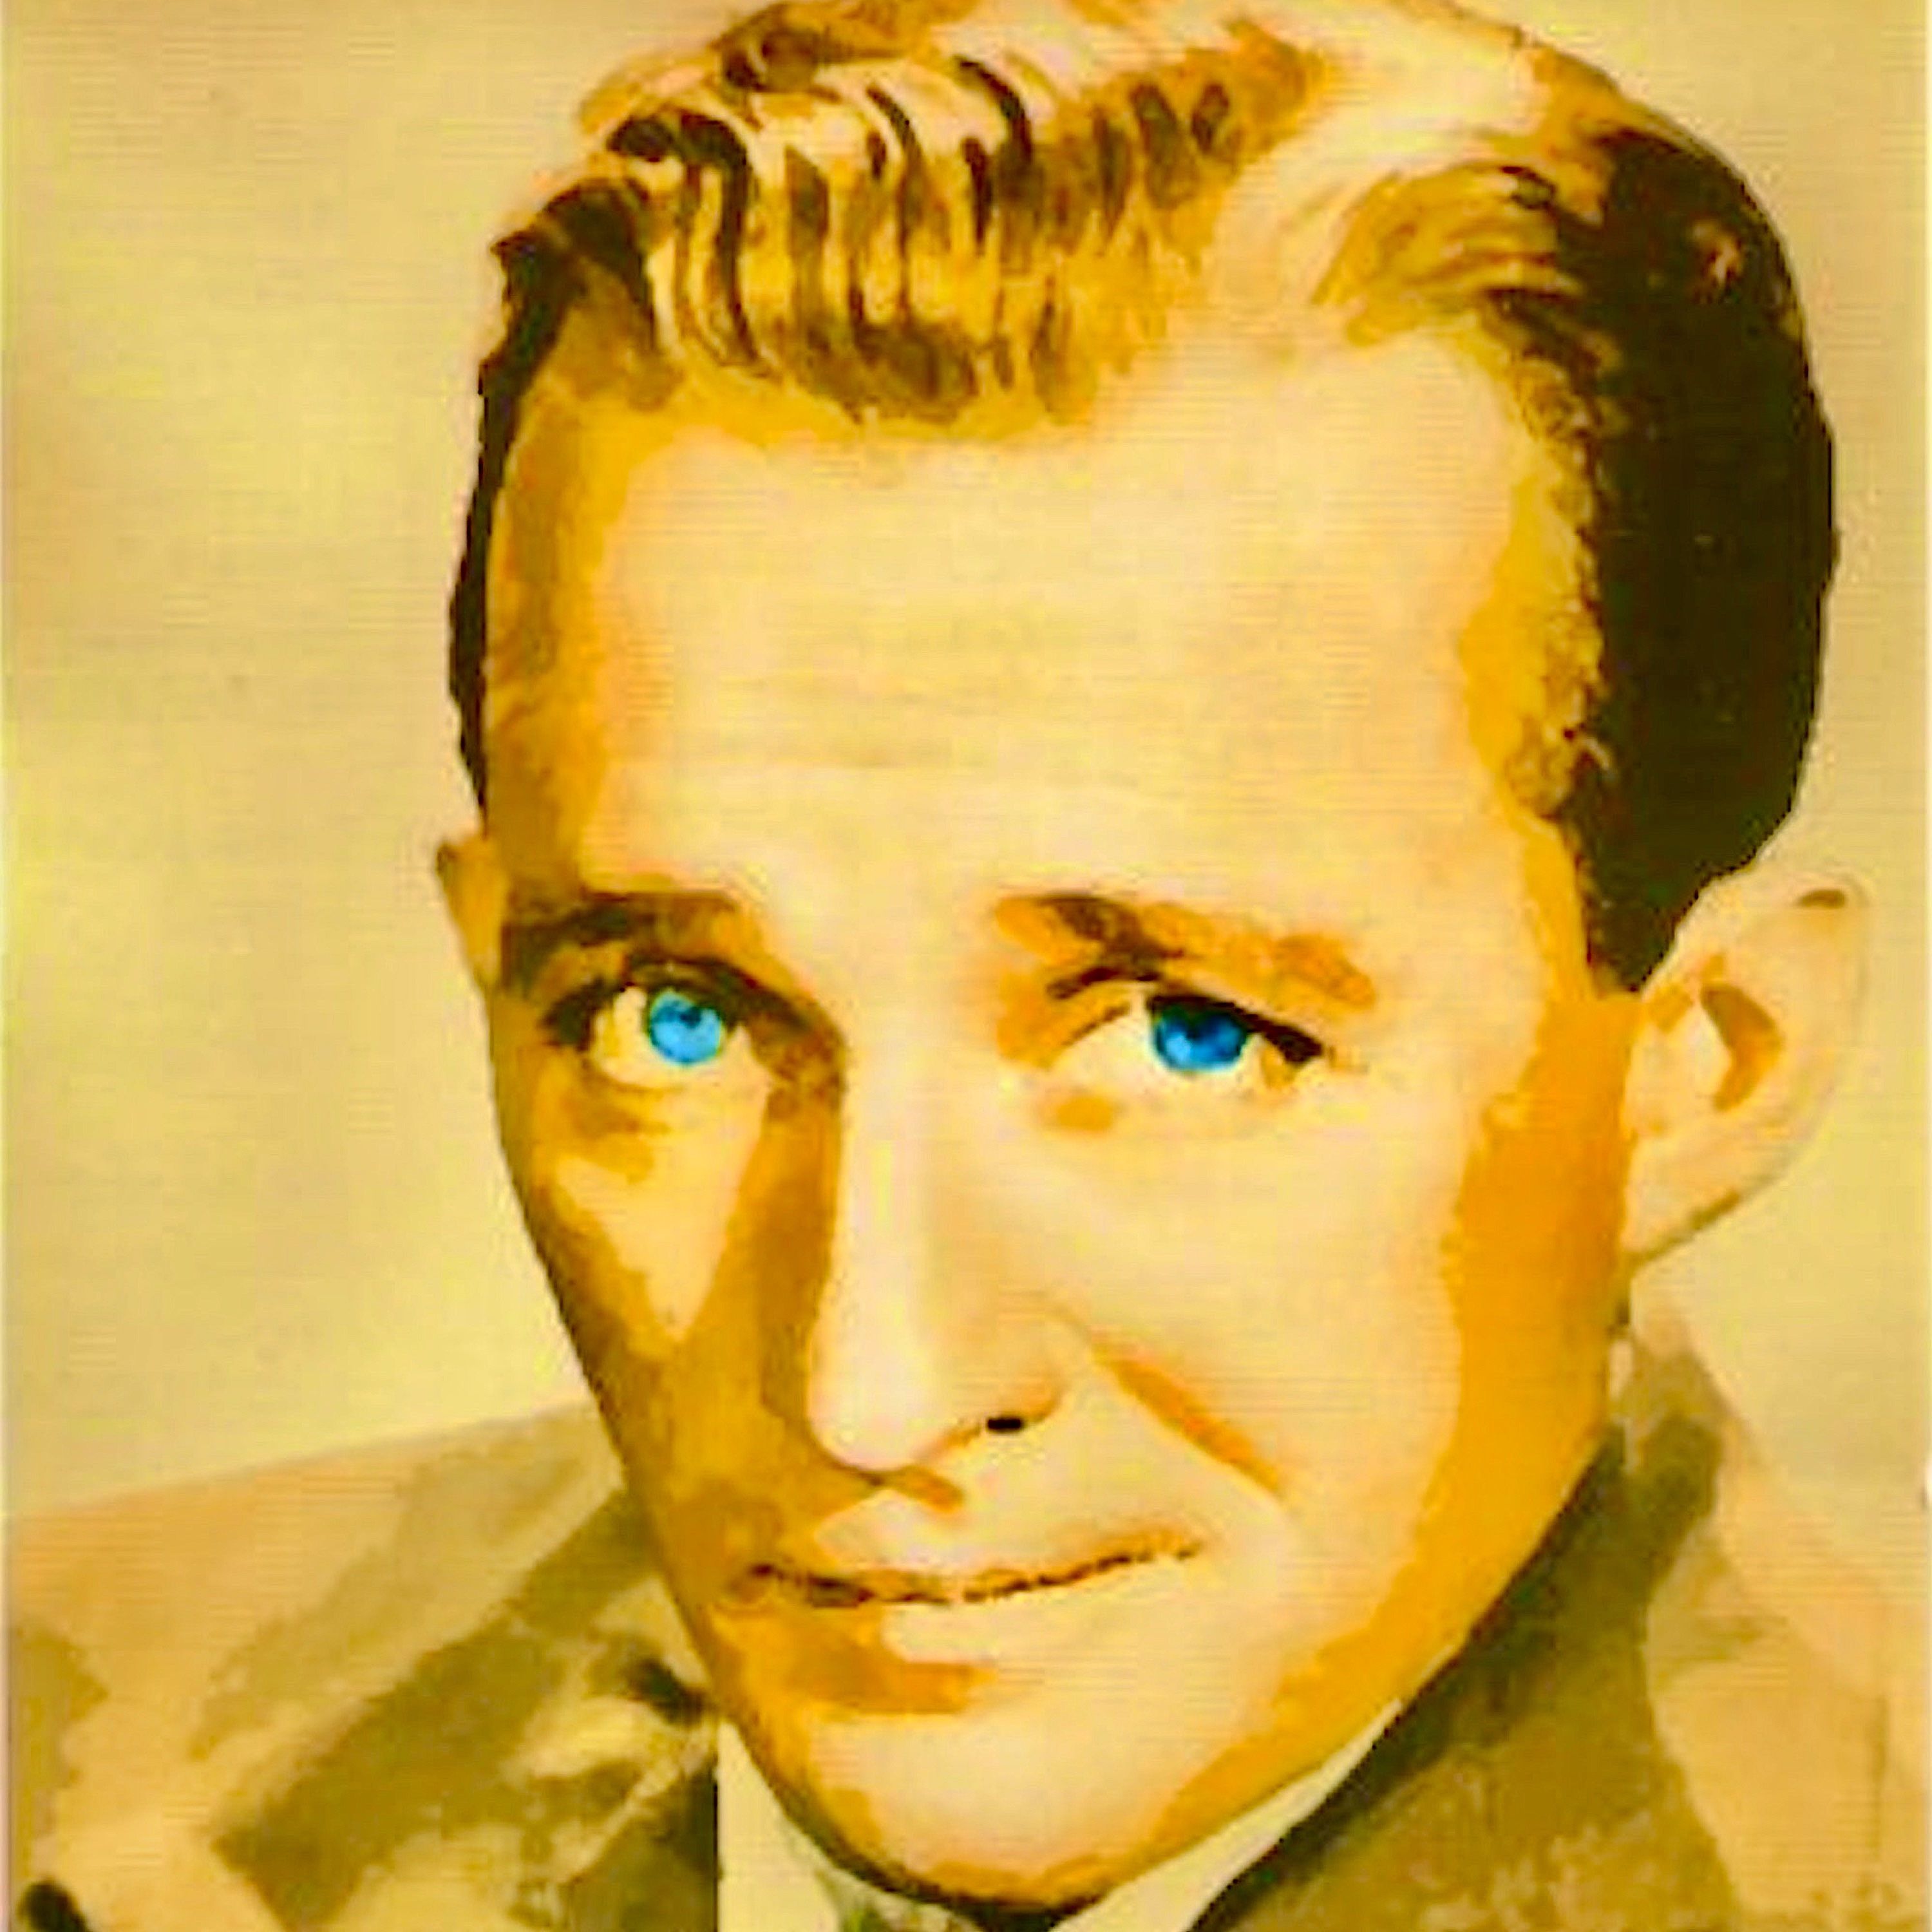 Bing Crosby – Only Number 1’s! (2019) [FLAC 24bit/96kHz]